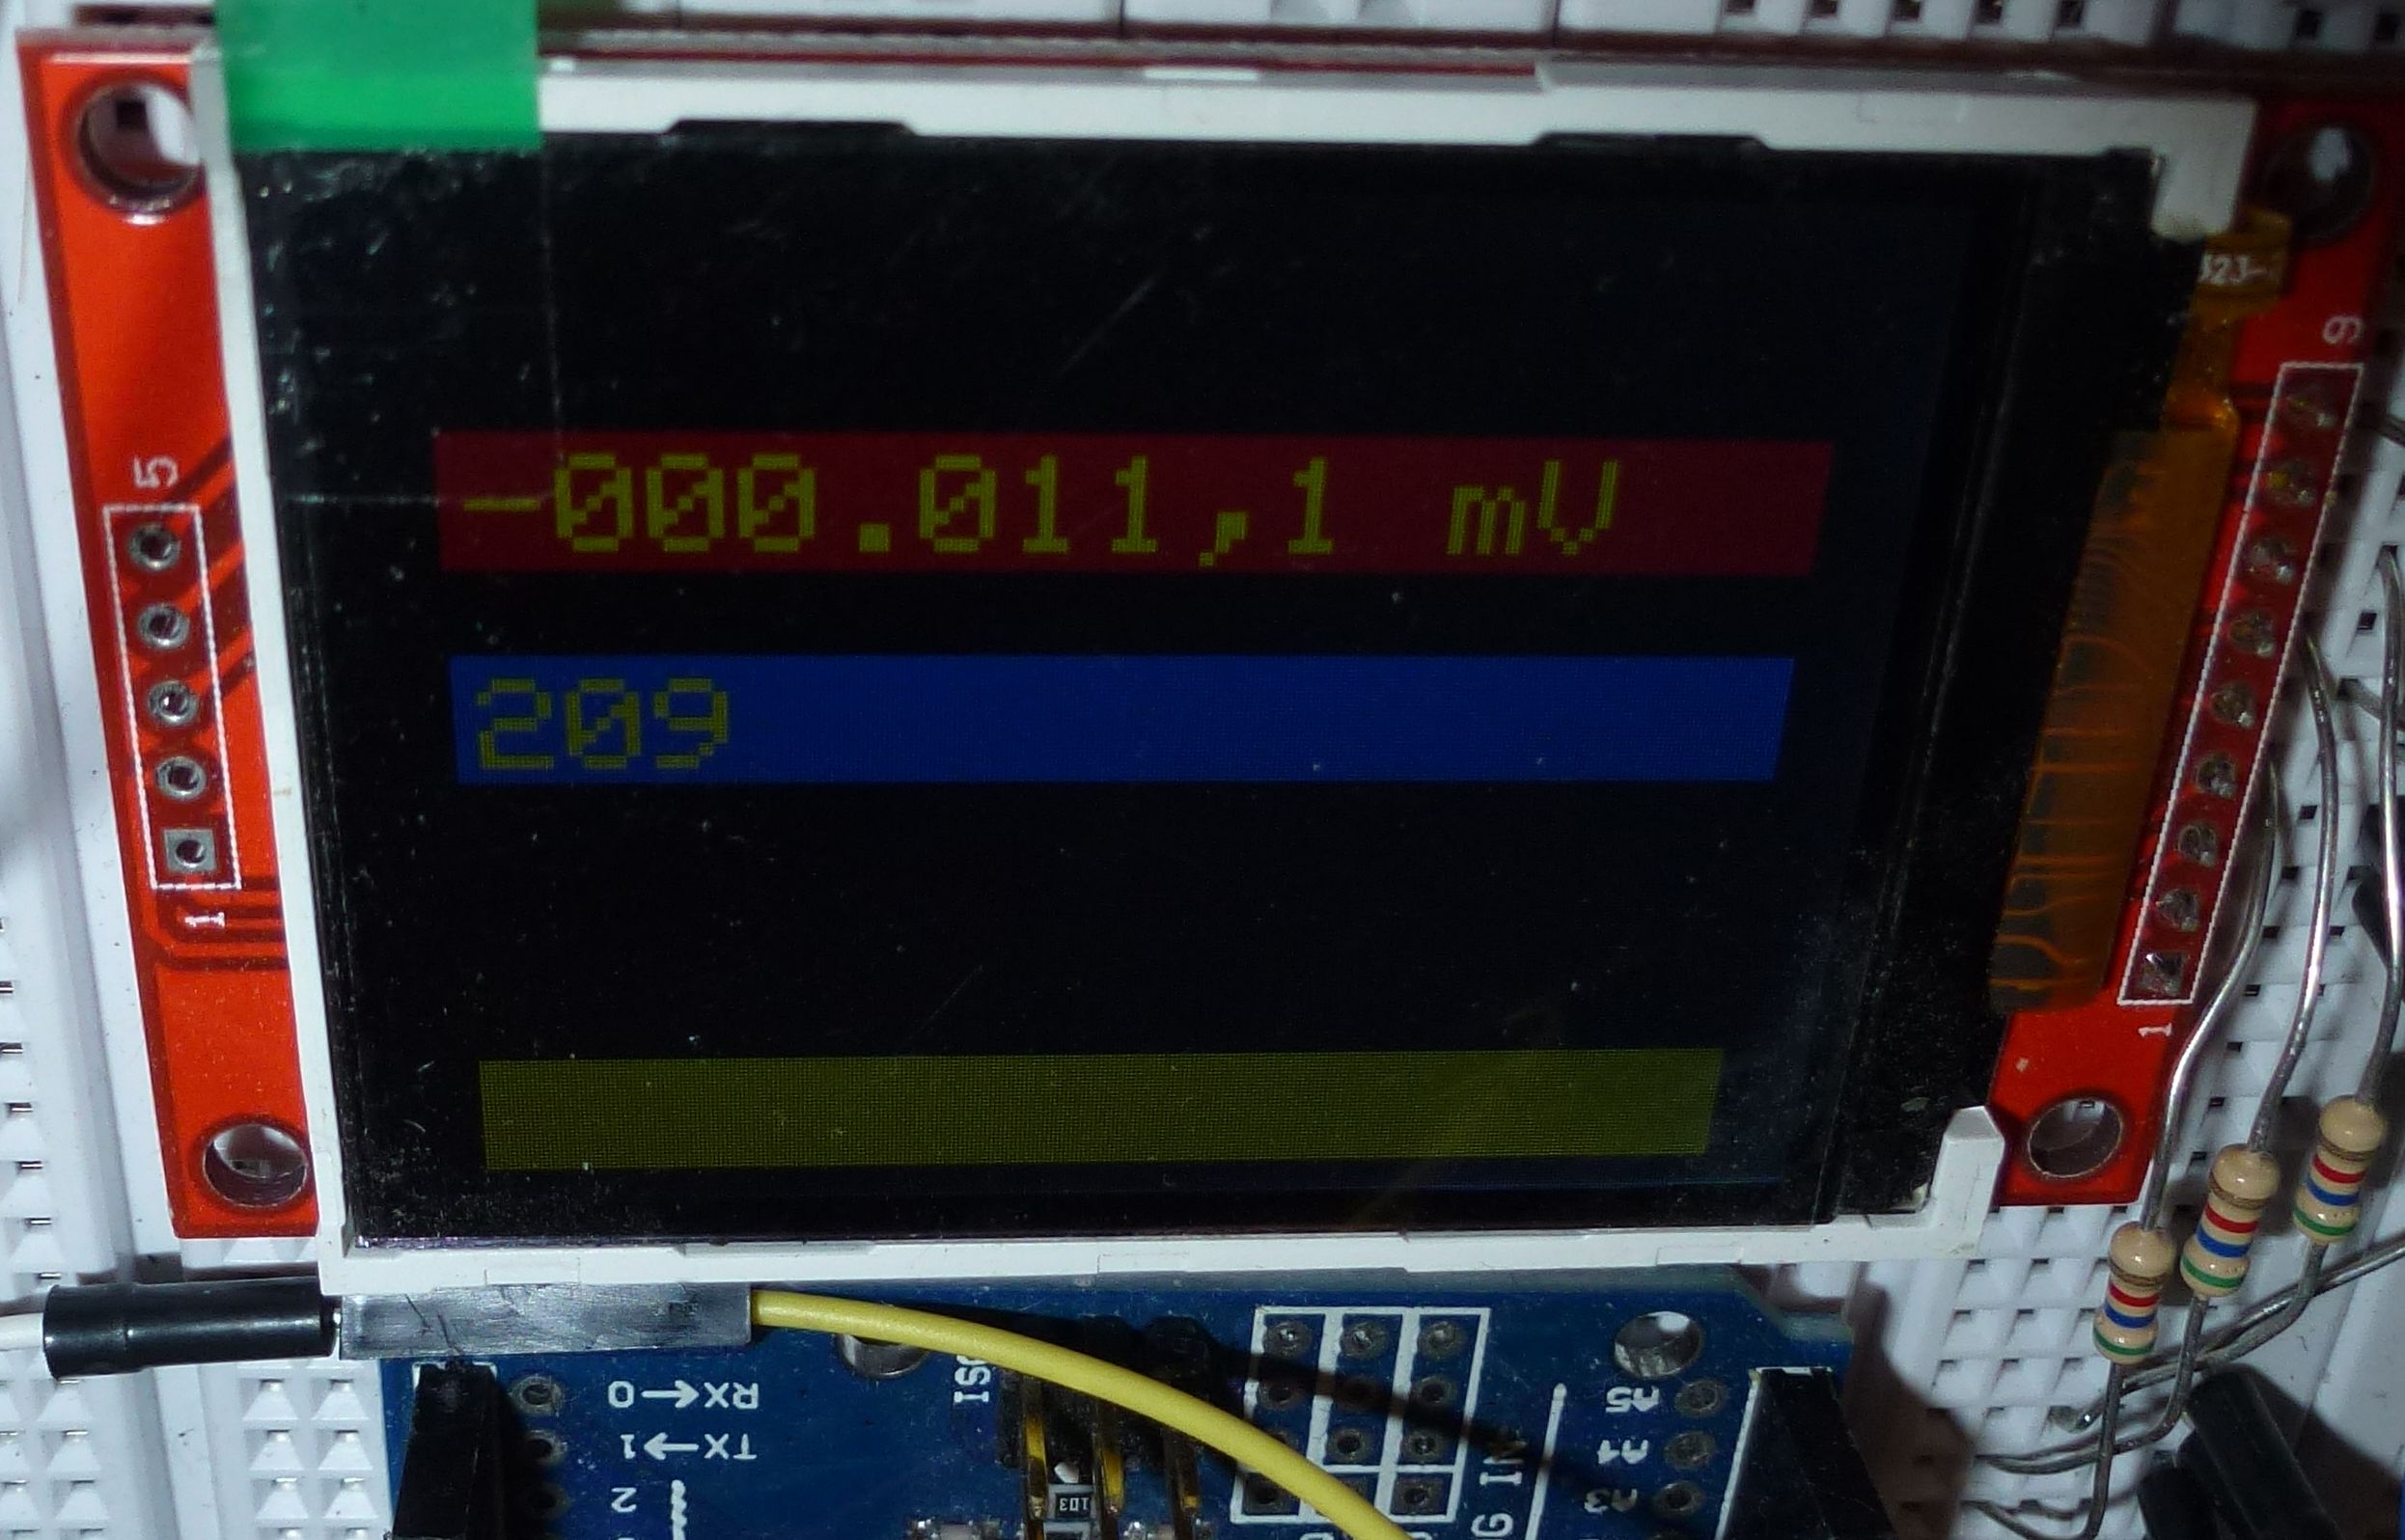 The same with the channel 209 configured as VDC, 6.5digits.